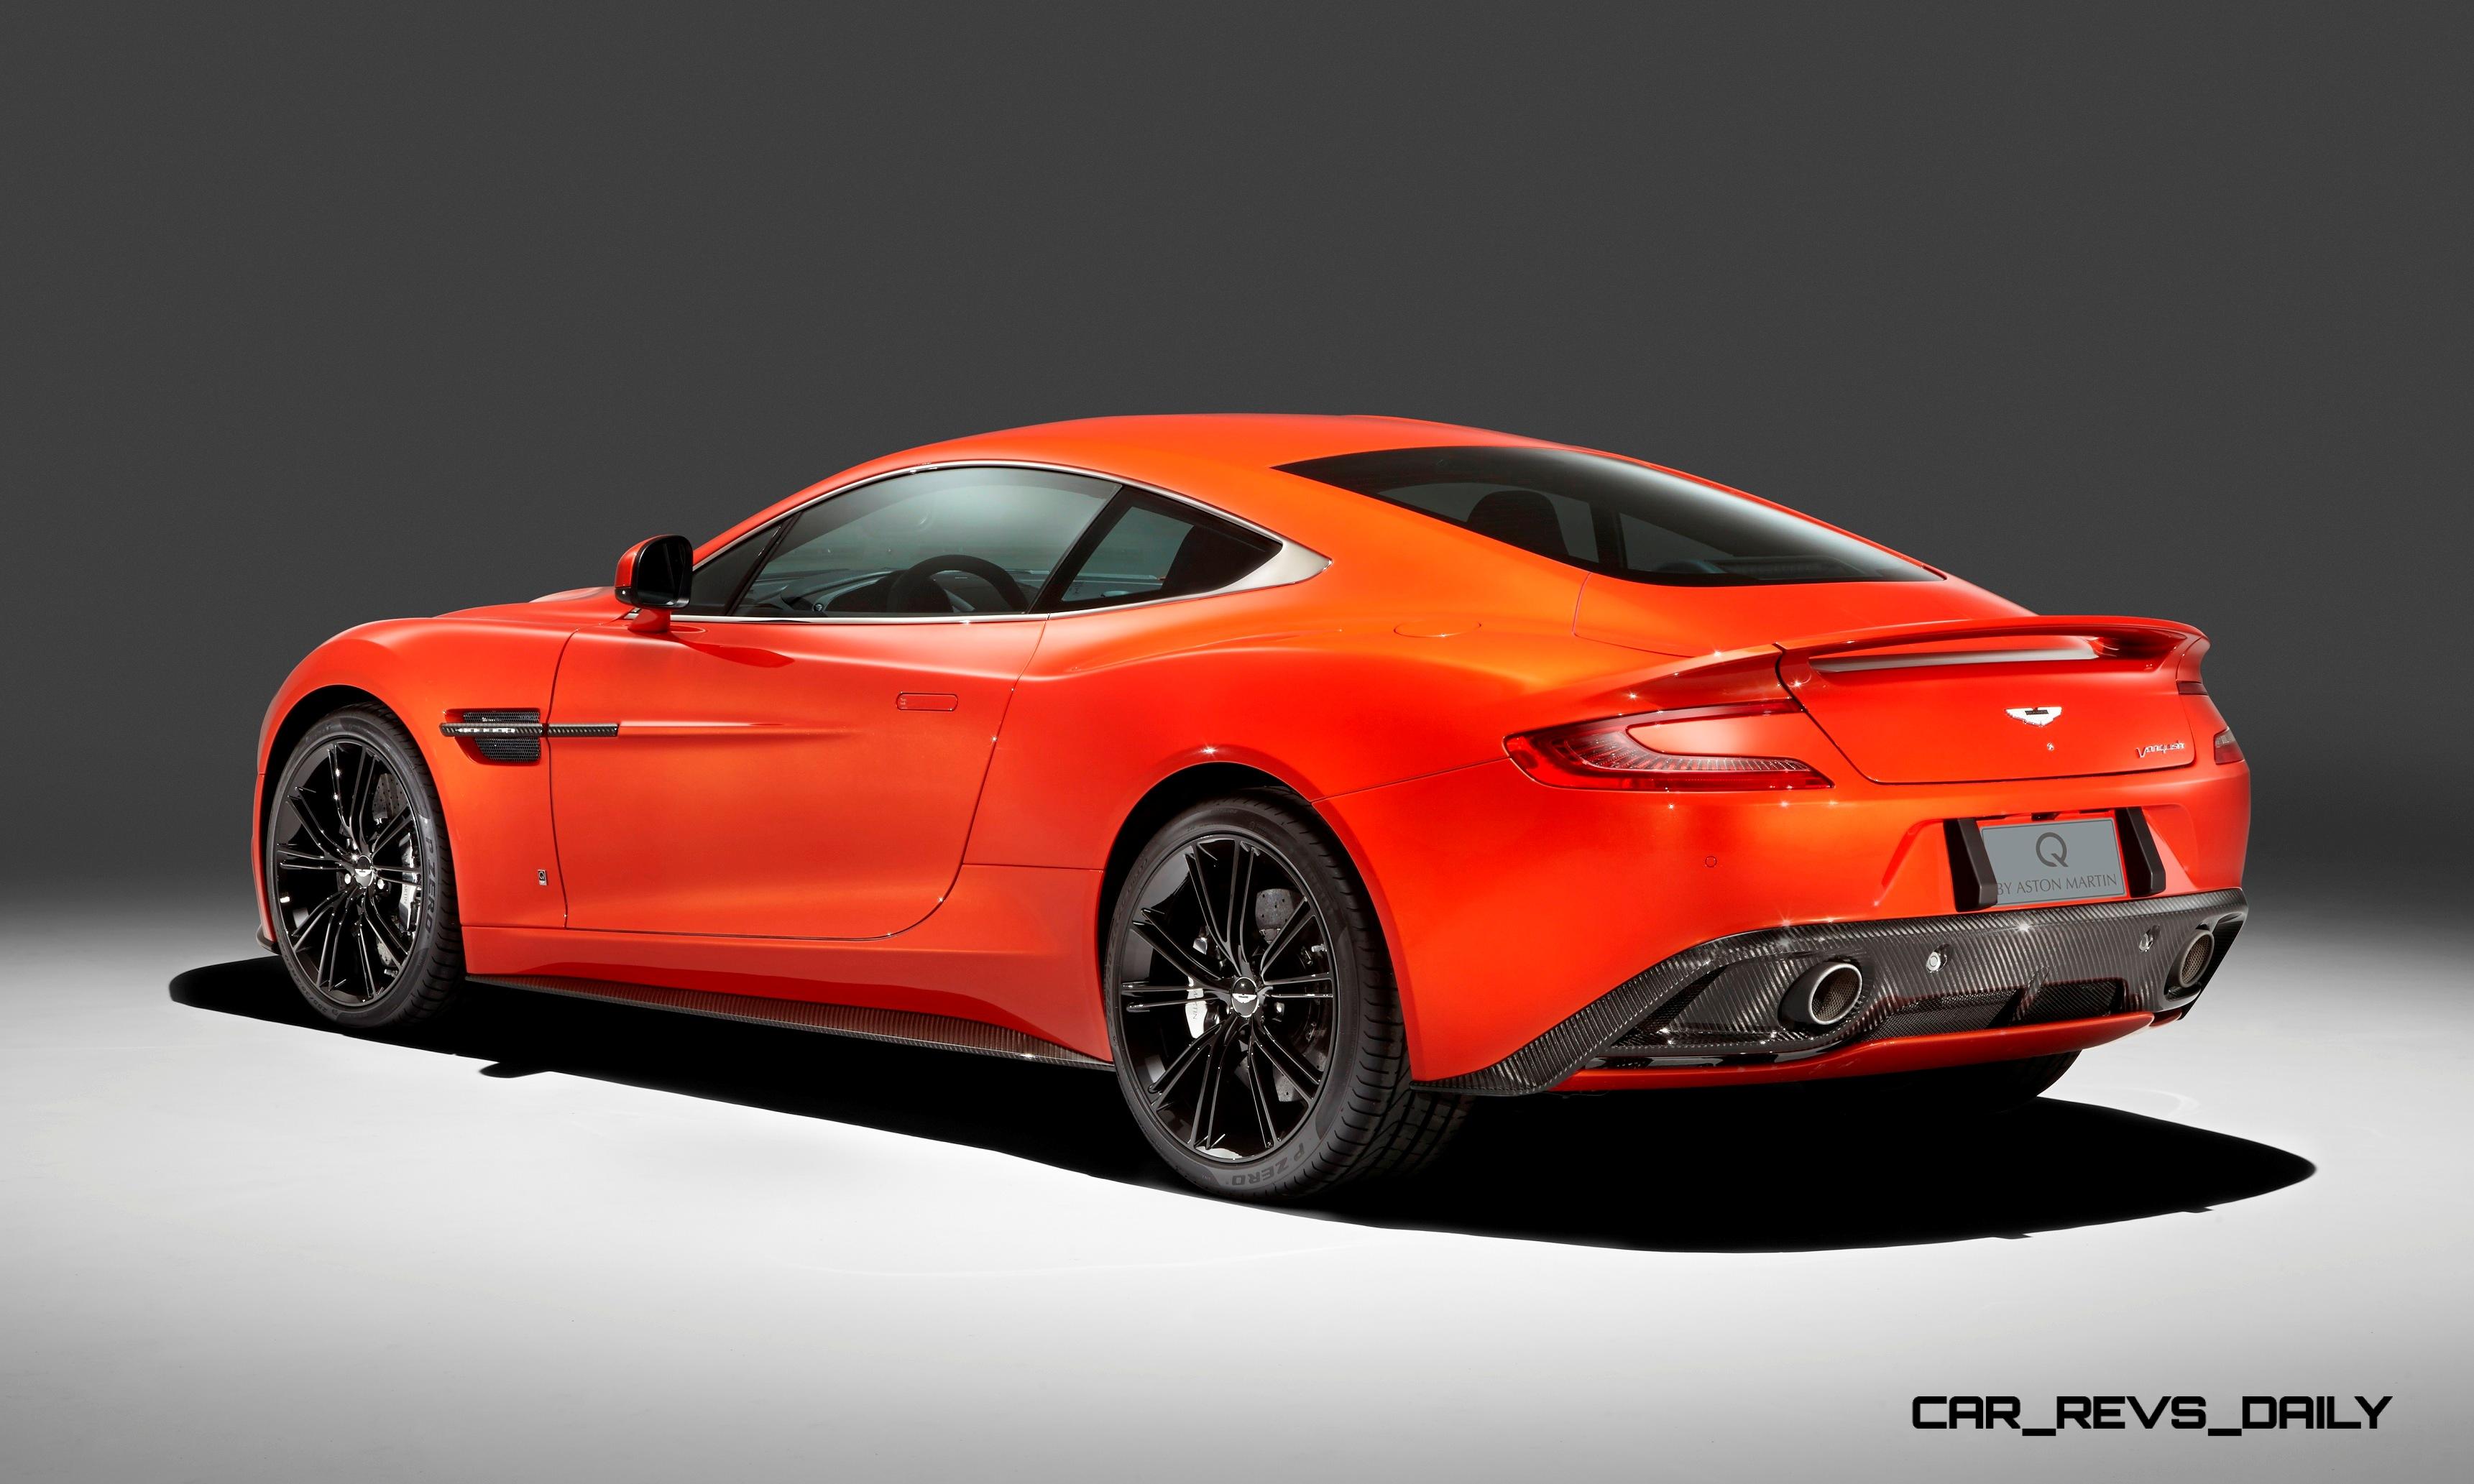 4 New Q by Aston Martin Specials Revealed for Pebble 2014 to Inspire